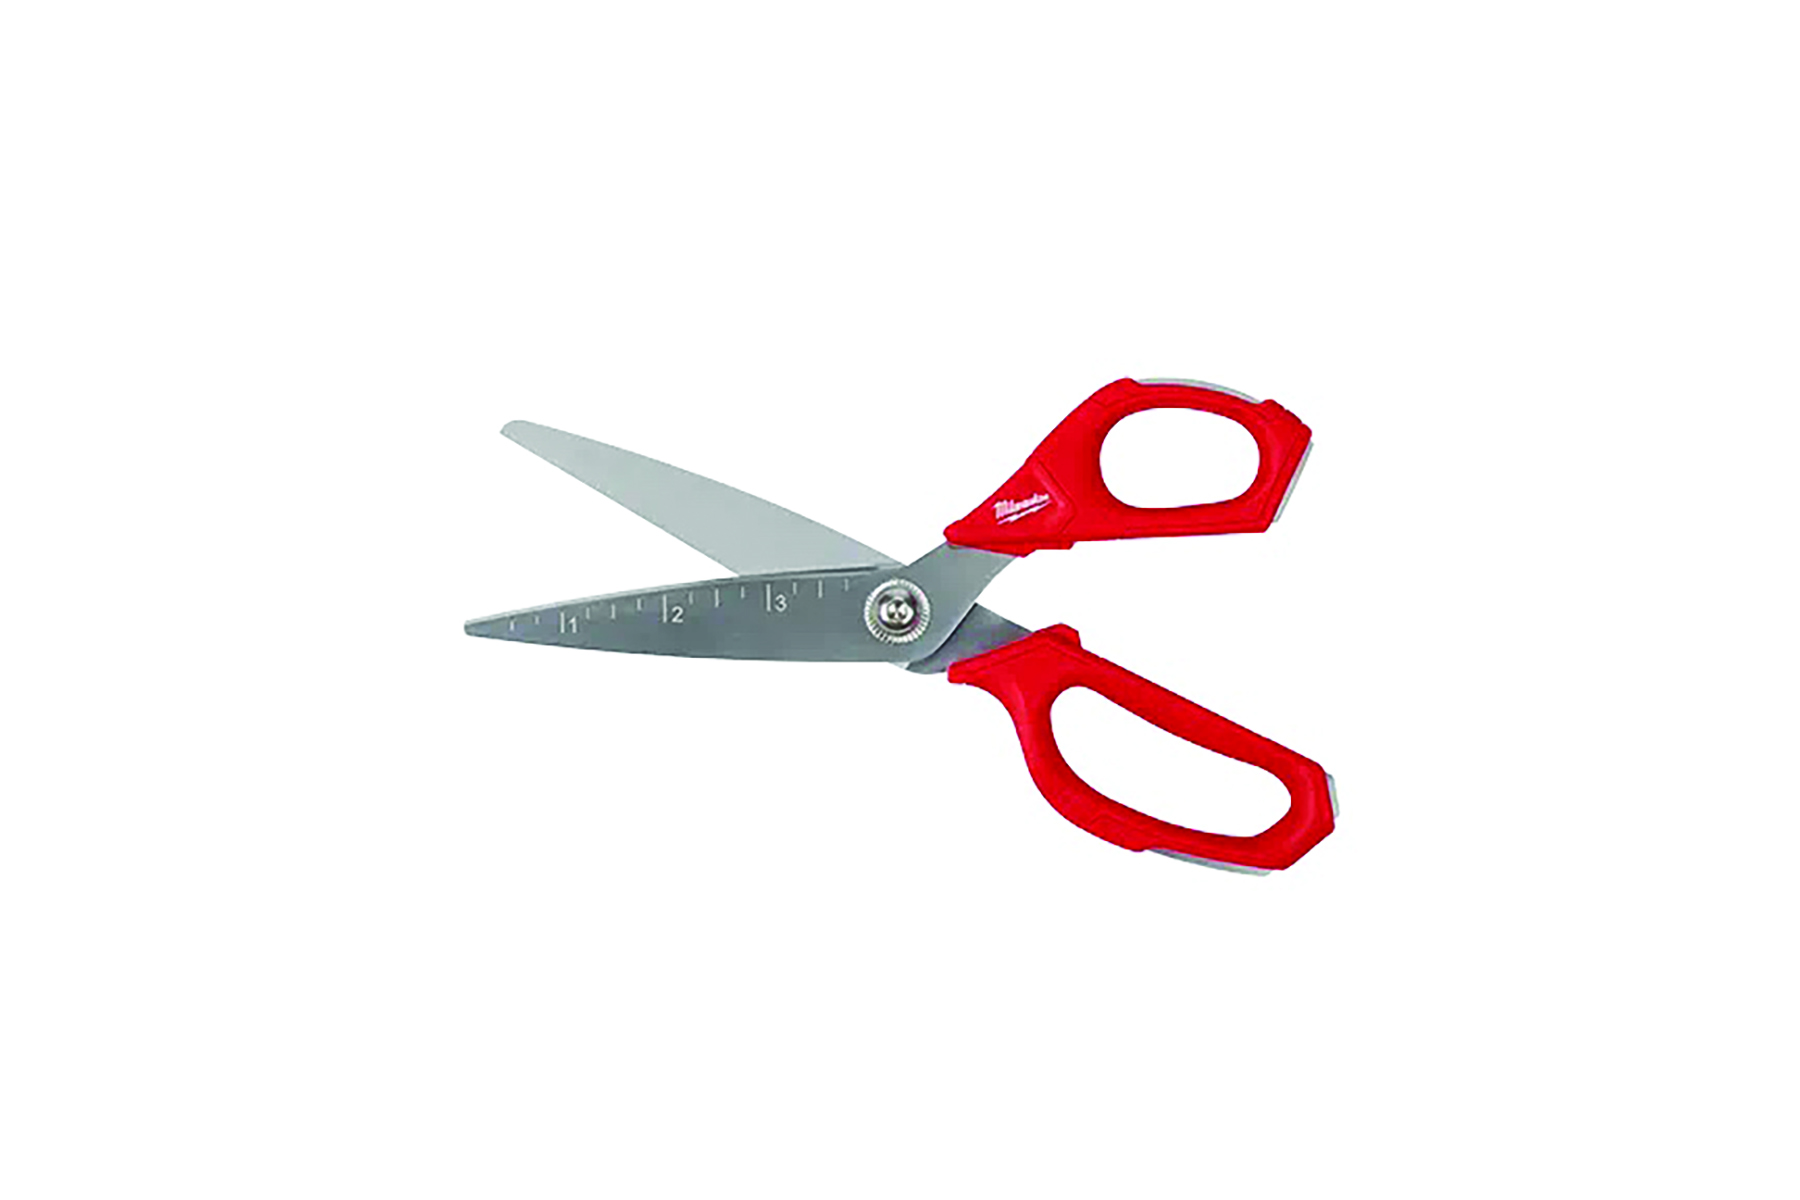 Red-handled scissors. Image by Milwaukee Tools.